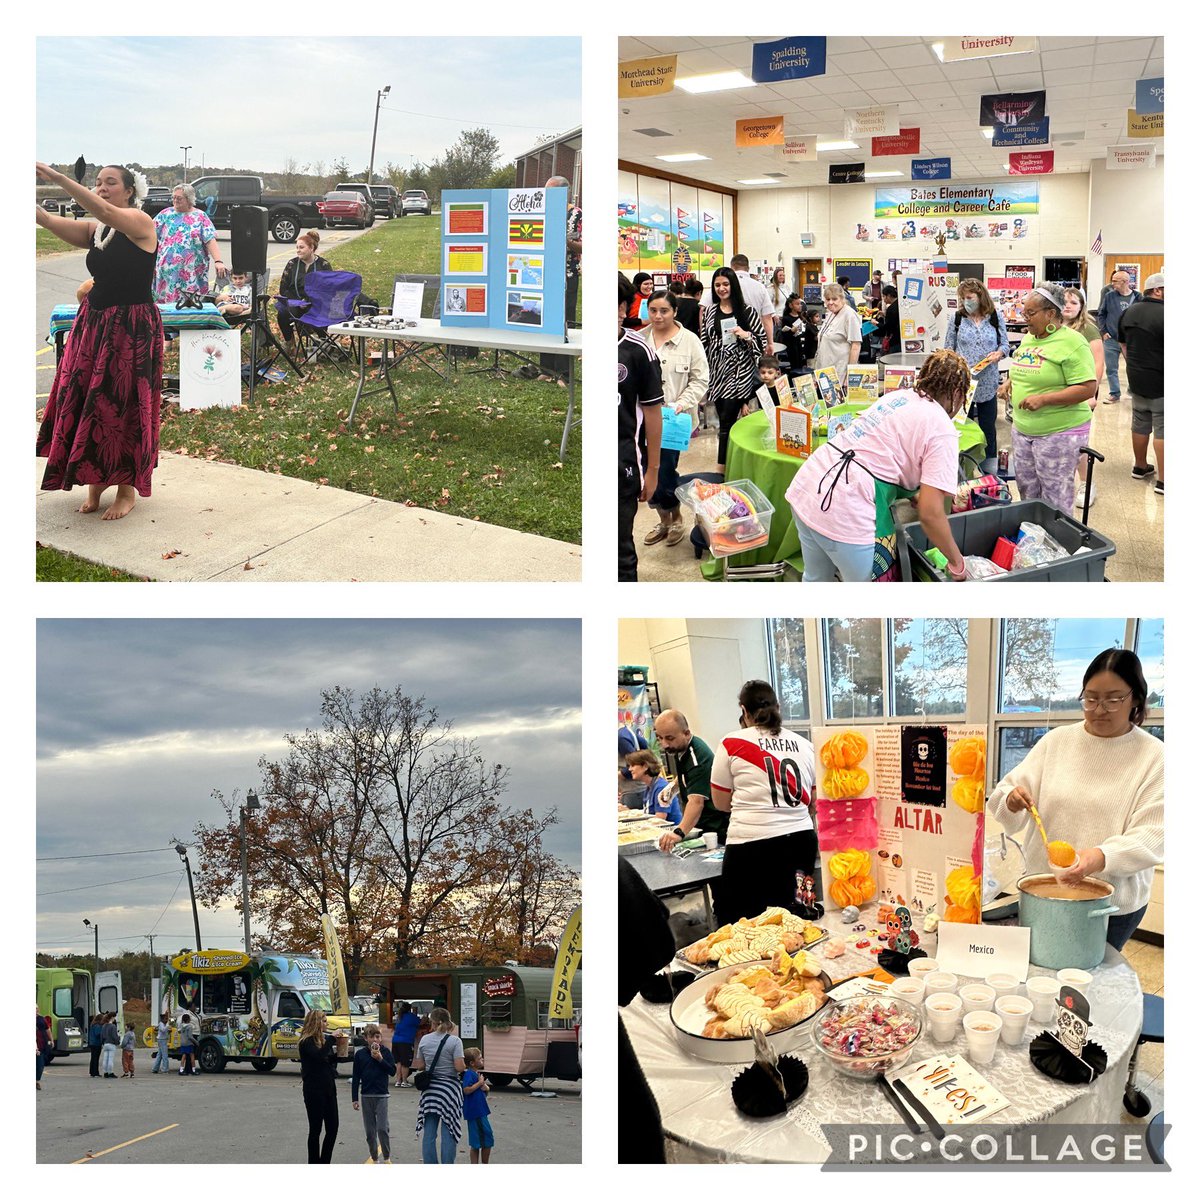 Kudos to @BatesElemJCPS for an AMAZING Culture Fest! The parade, booths, food trucks and live dance groups were an awesome representation of your school culture! @JCPSDEP1 @JCPSKY